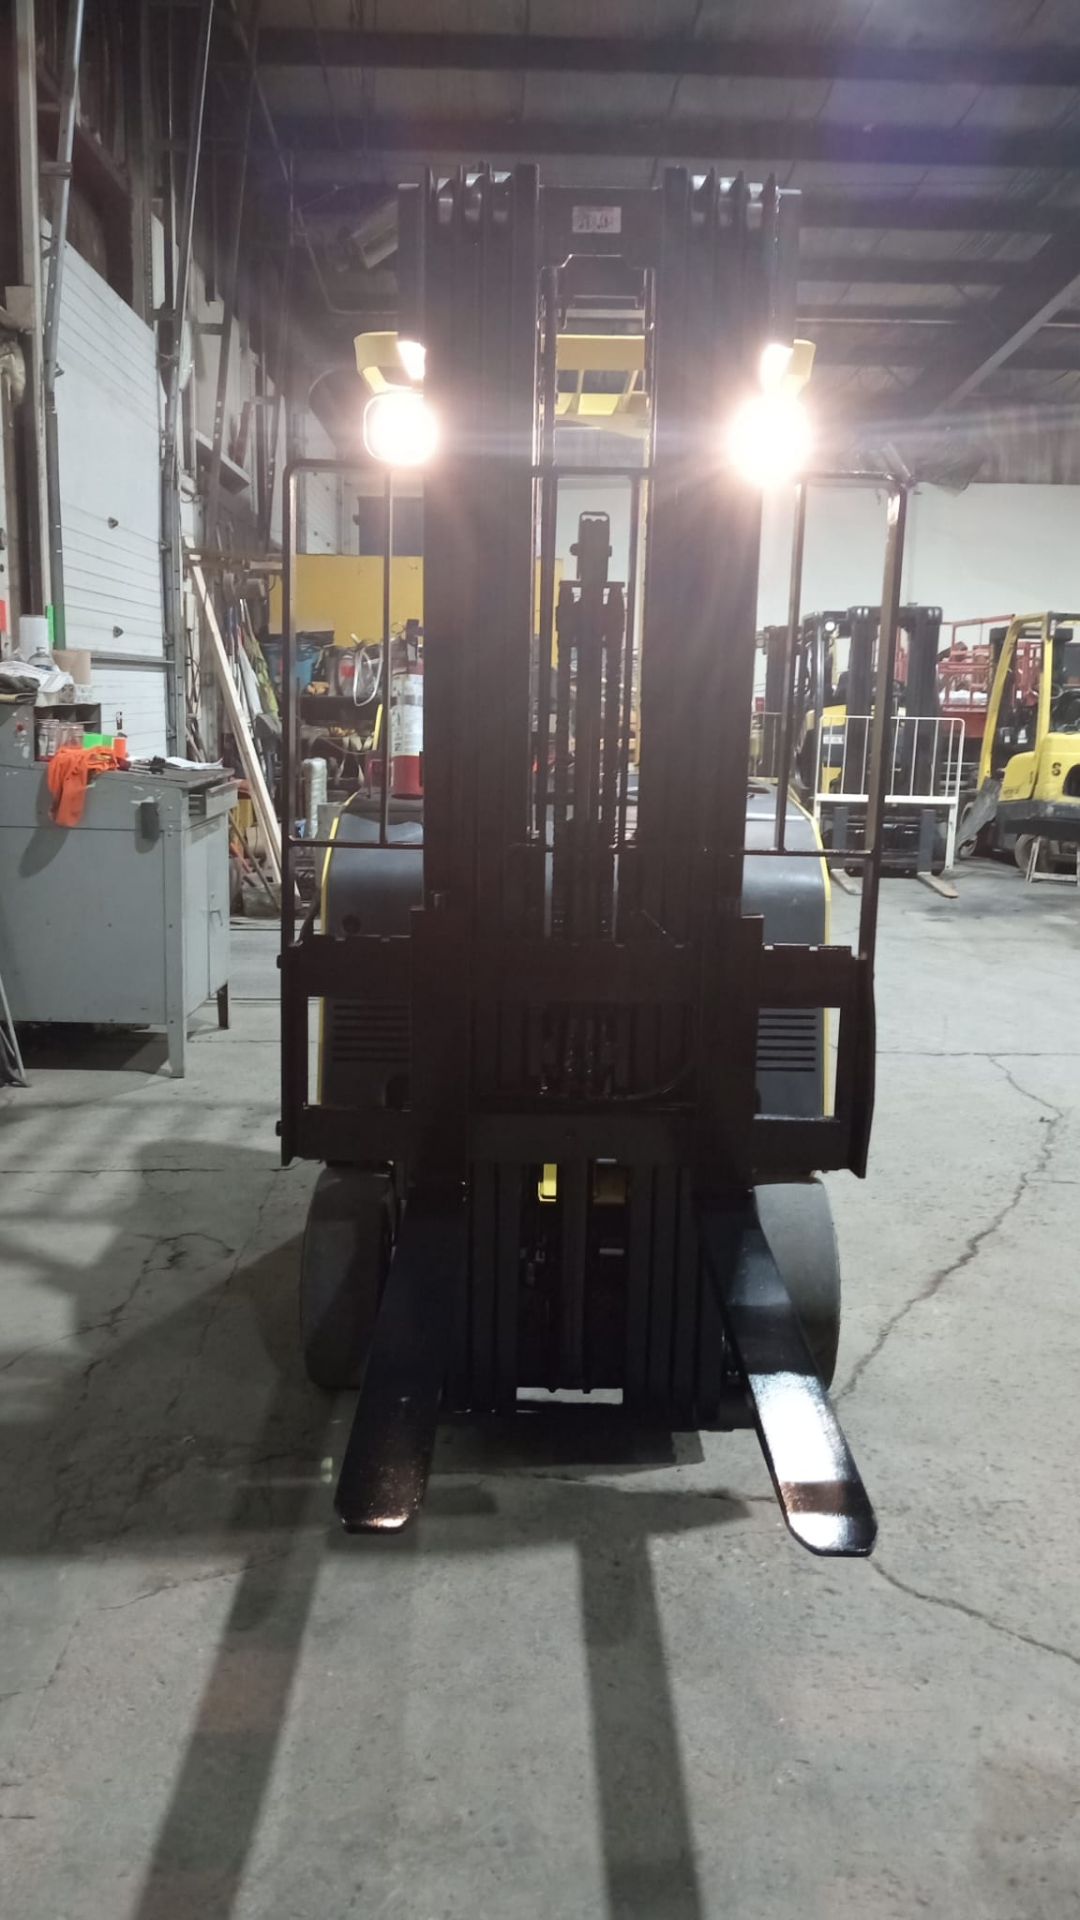 2014 Hyster 3,500lbs Capacity Electric Stand On Forklift 4-STAGE MAST 36V with sideshift - FREE - Image 5 of 6